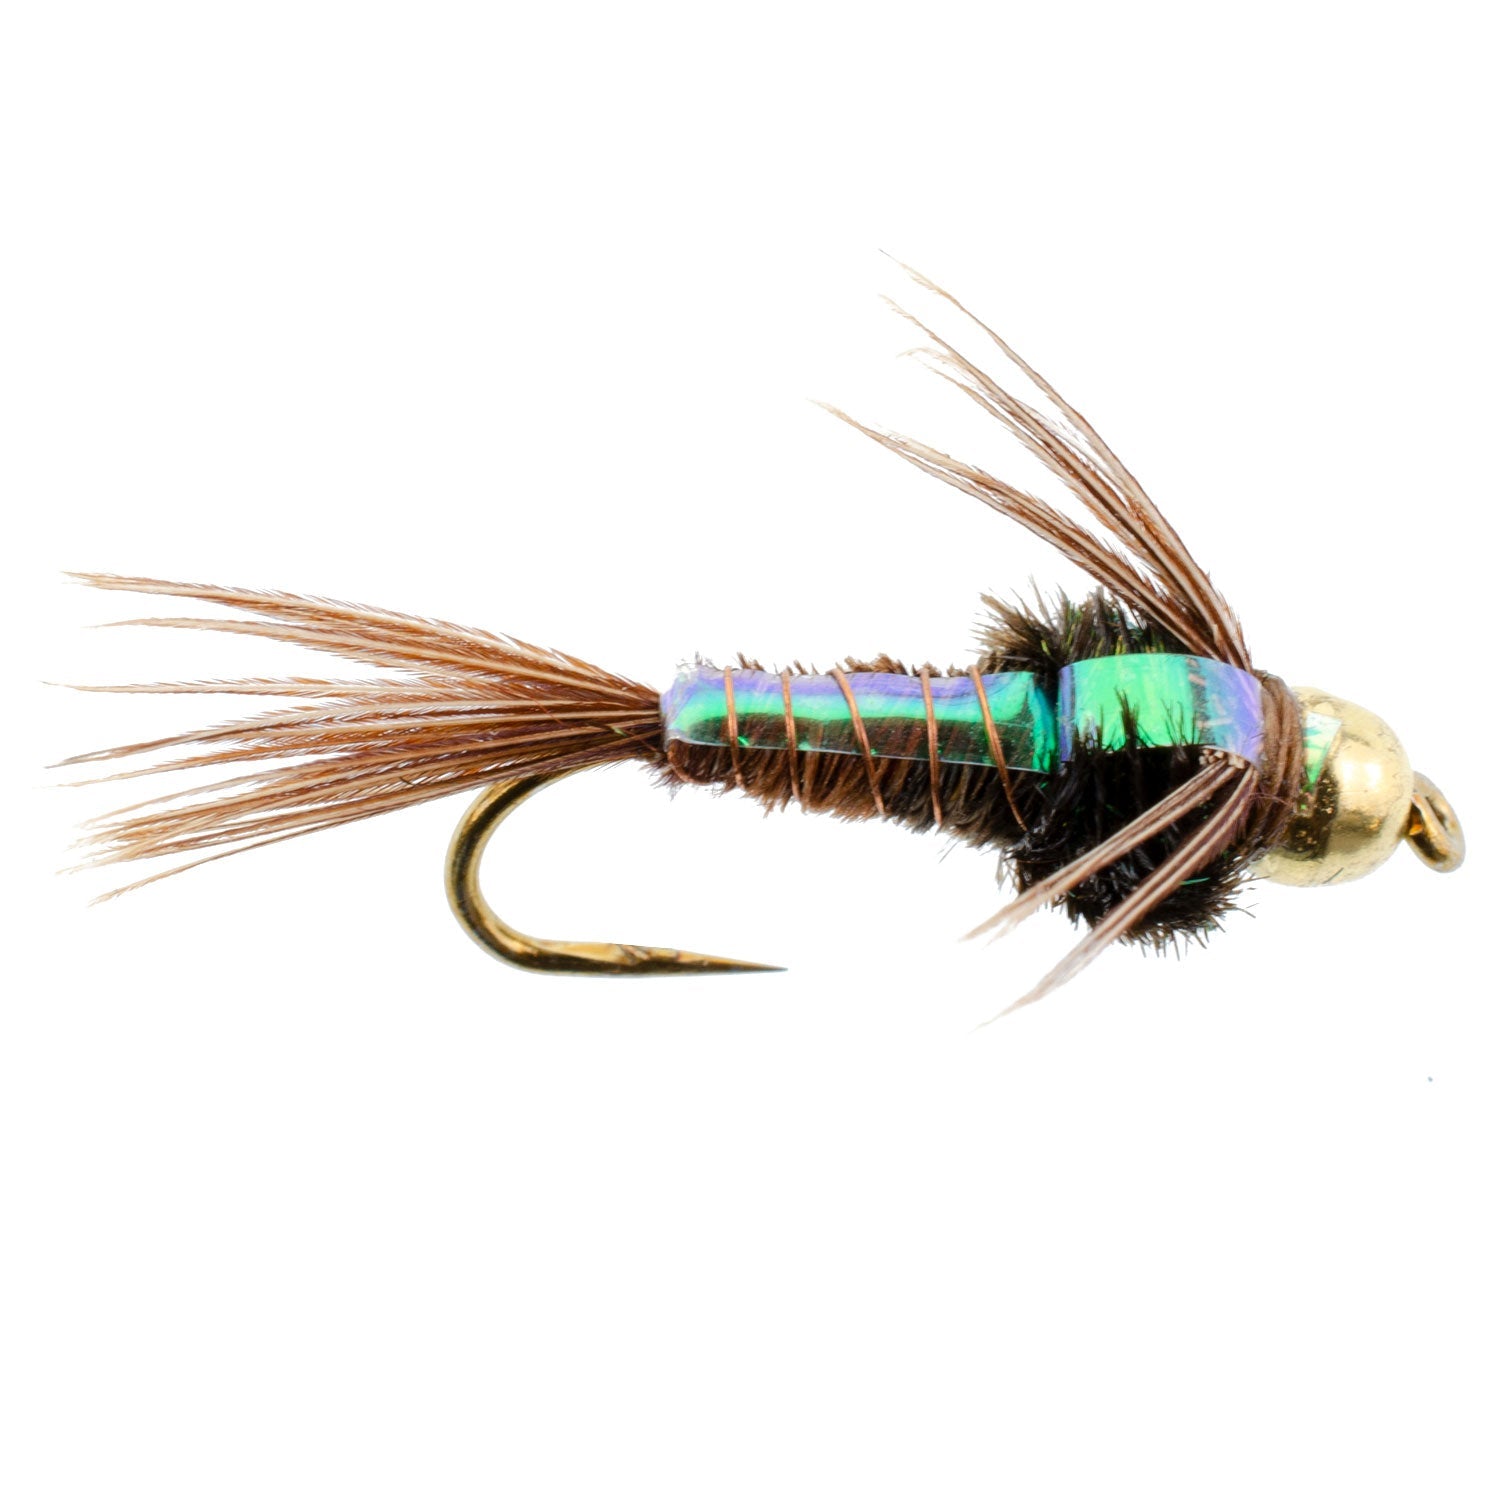 Barbless Bead Head Flashback Pheasant Tail Nymph Fly 6 Flies Hook Size 12